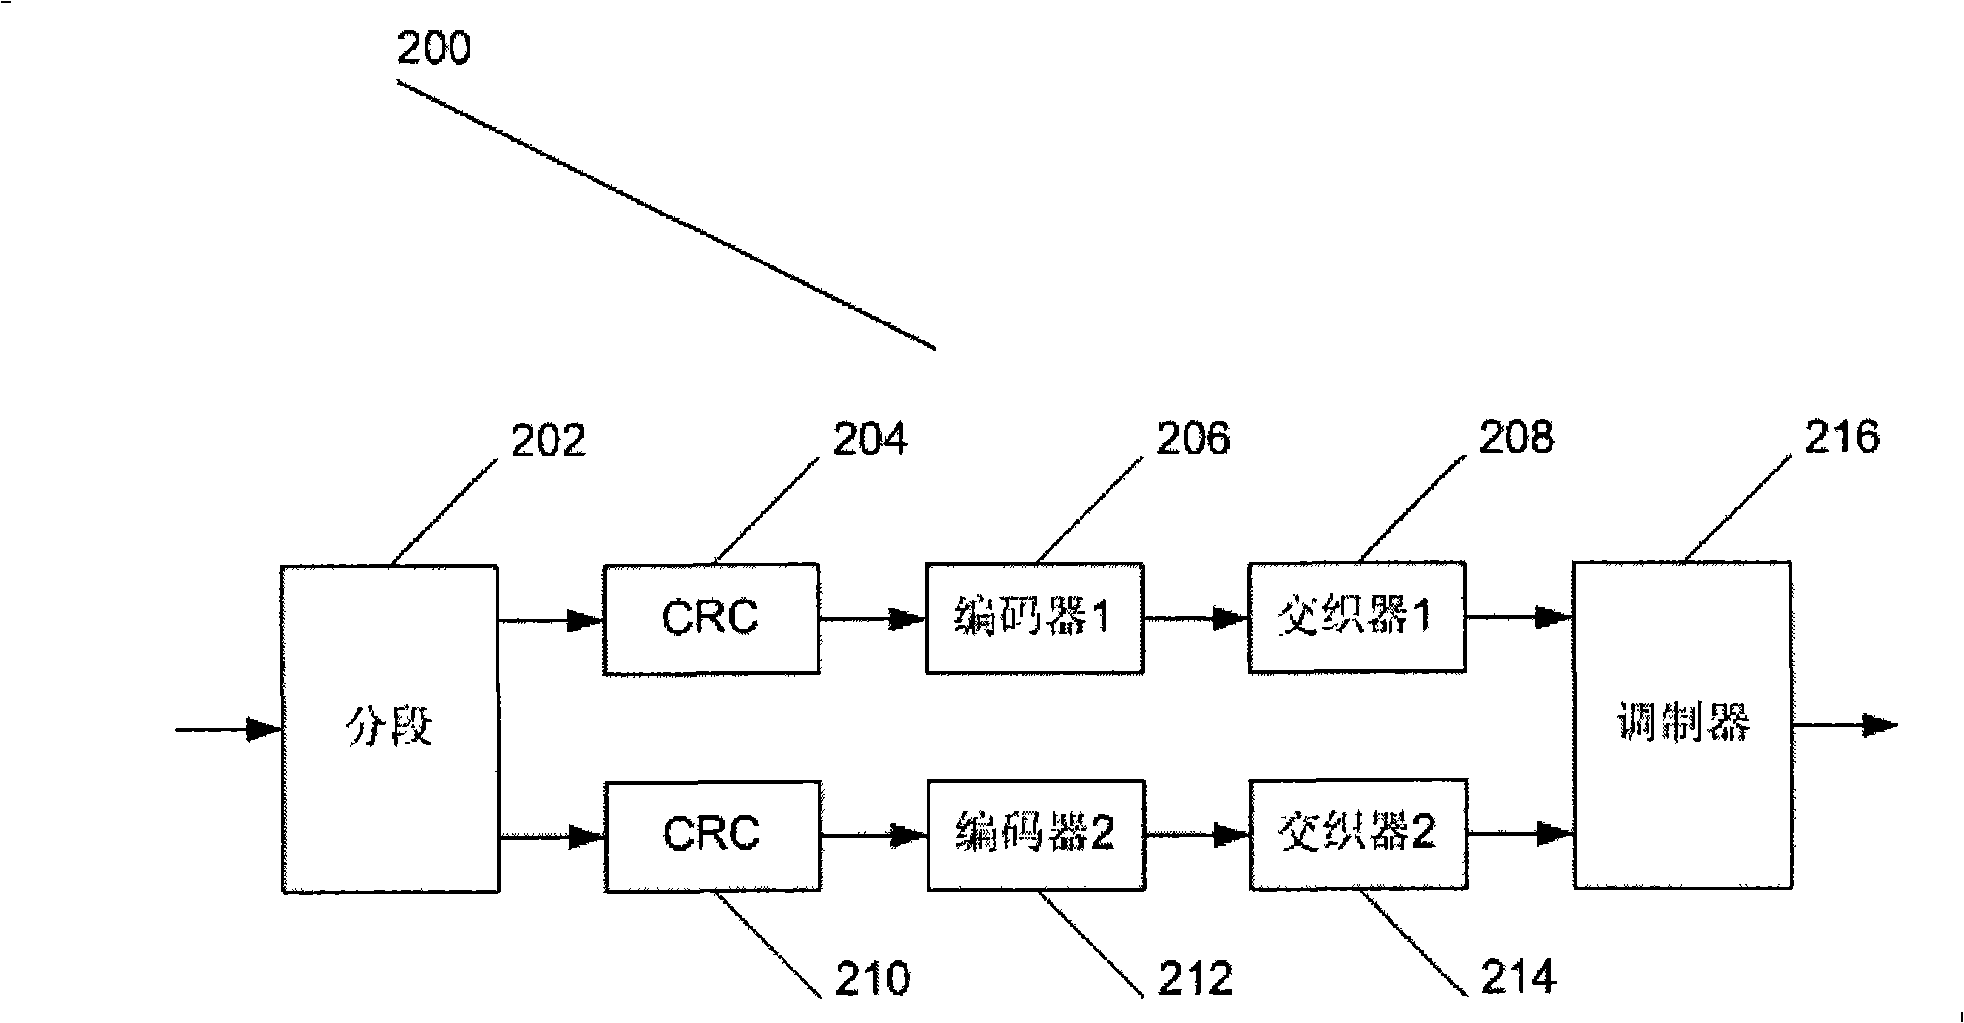 MIMO-MMSE-SIC-HARQ communication system